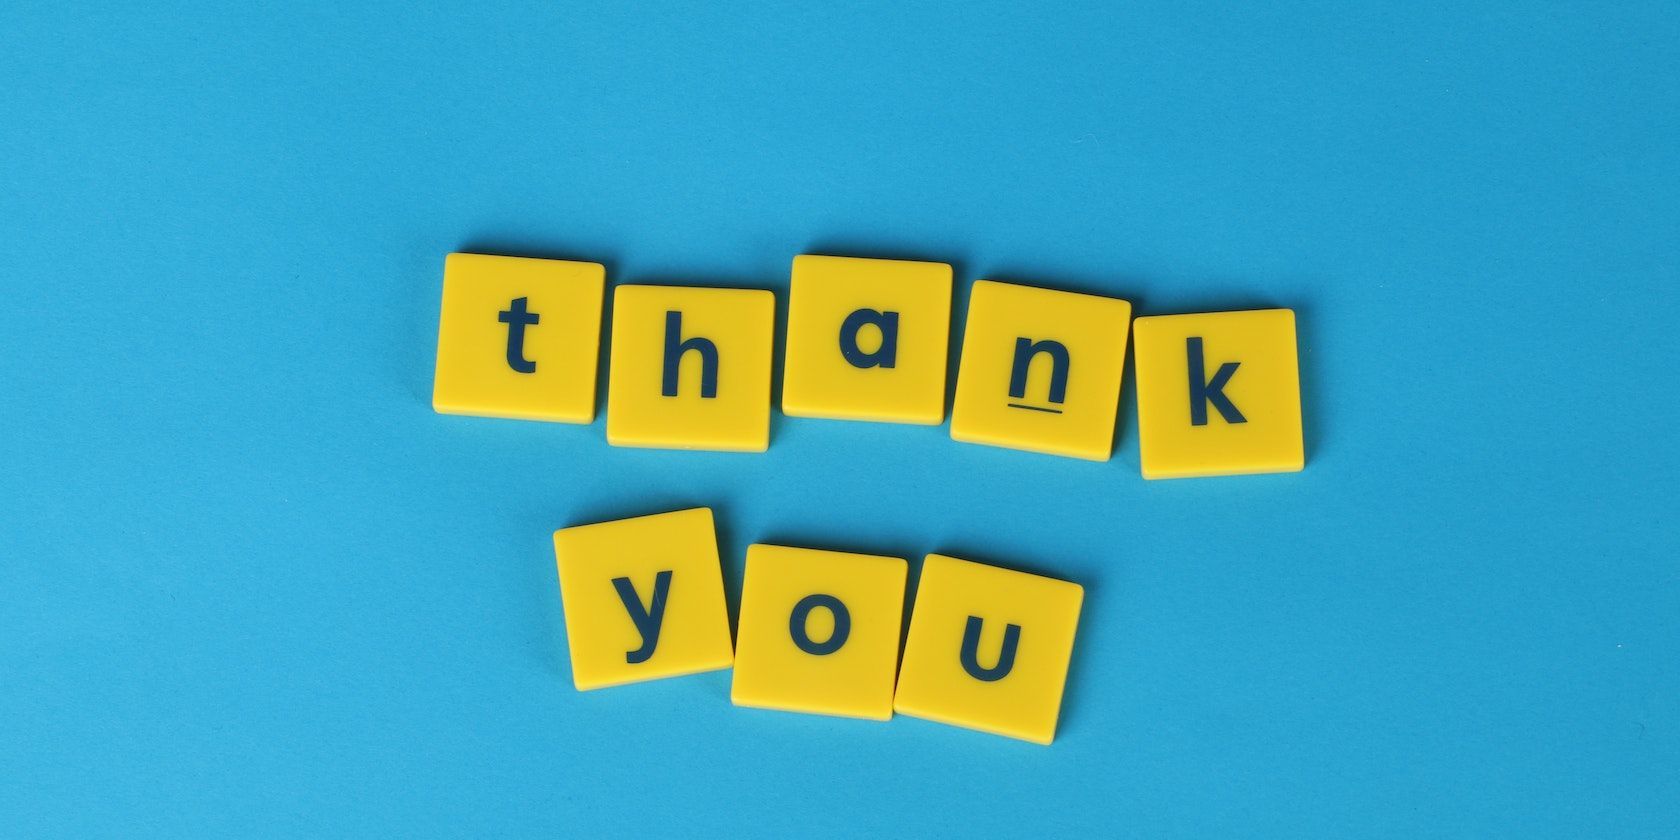 thank you written in yellow tiles and blue background